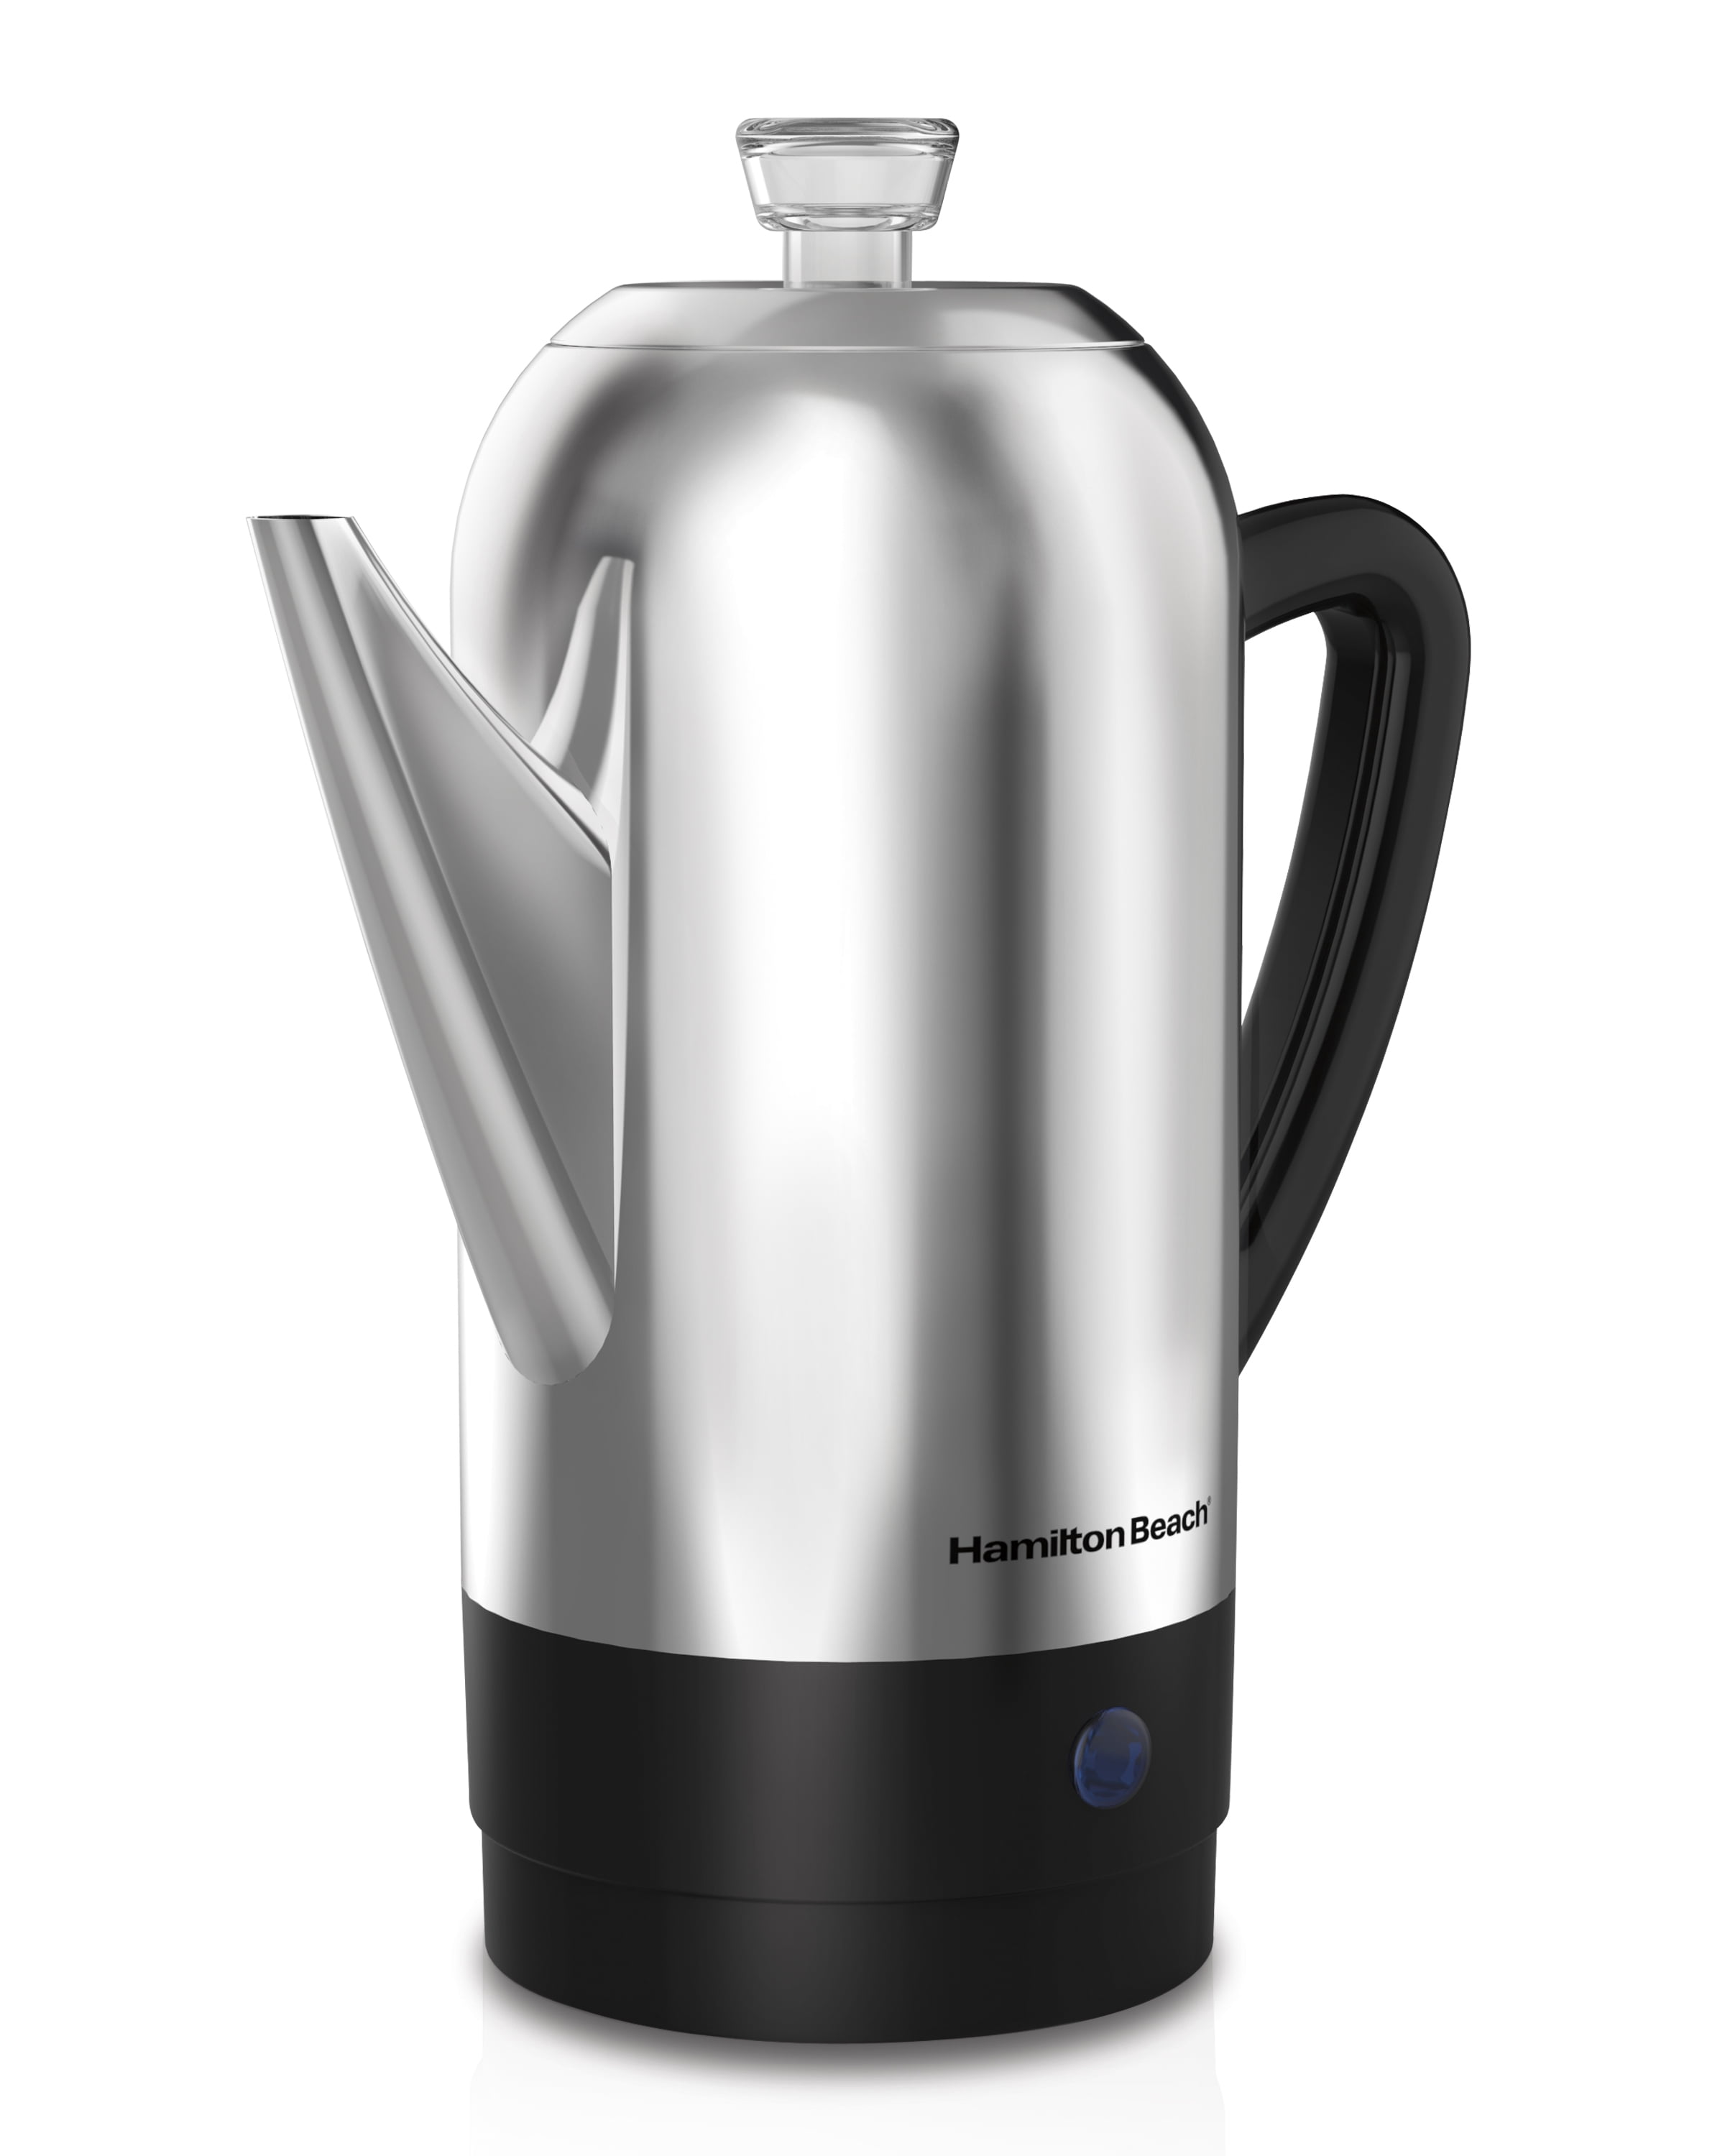 Stainless Steel 12 Cup Hamilton Beach Electric Percolator Coffee Maker 